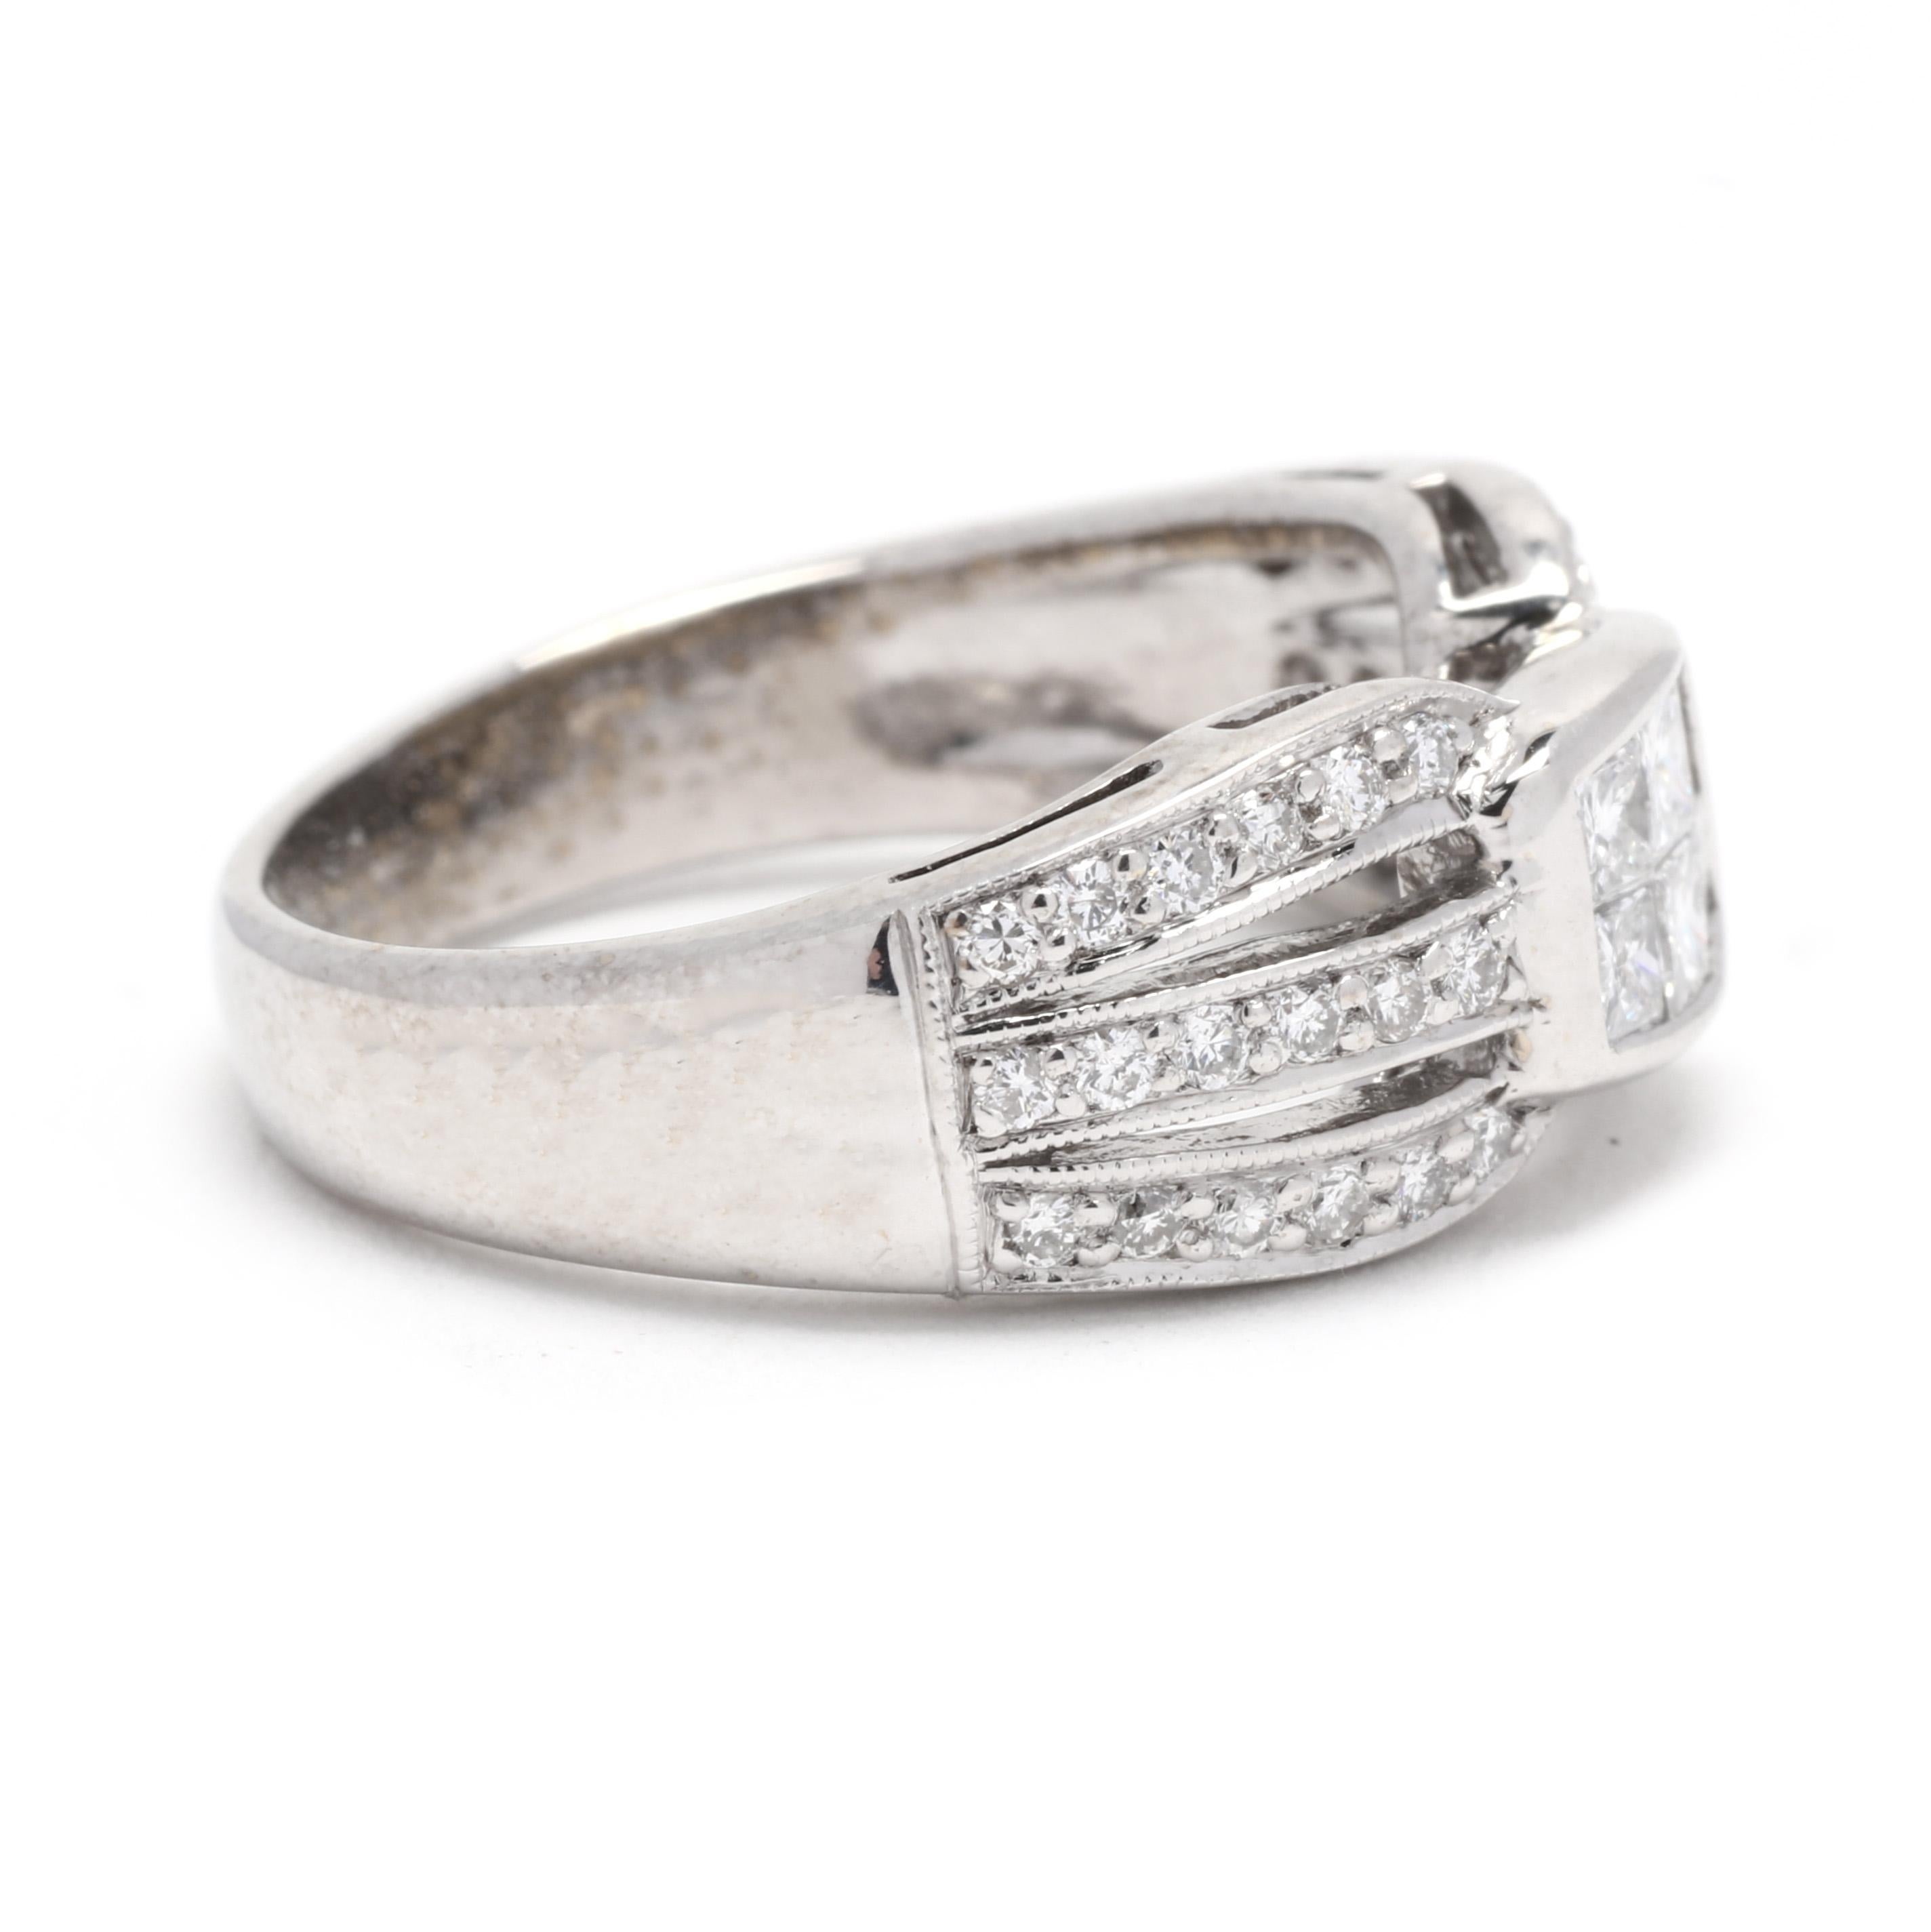 A vintage 18 karat white gold wide diamond band ring. This fancy diamond band features a pinch design with a central cluster of princess cut diamonds weighing approximately .42 total carats with a three row split band set with round brilliant cut